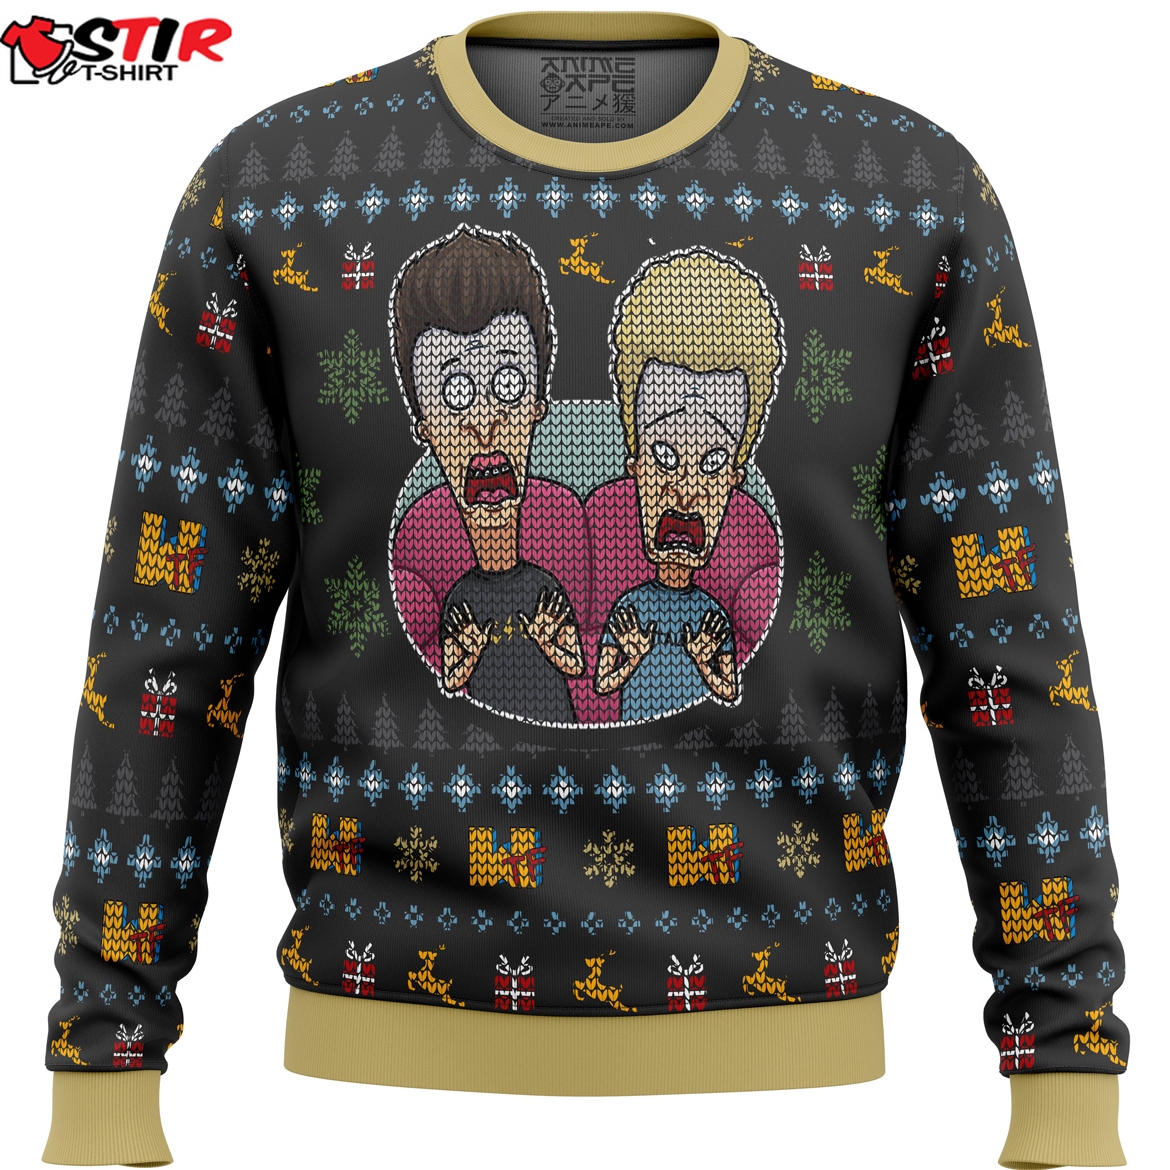 Beavis And Butthead Surprise Reaction Ugly Christmas Sweater Stirtshirt